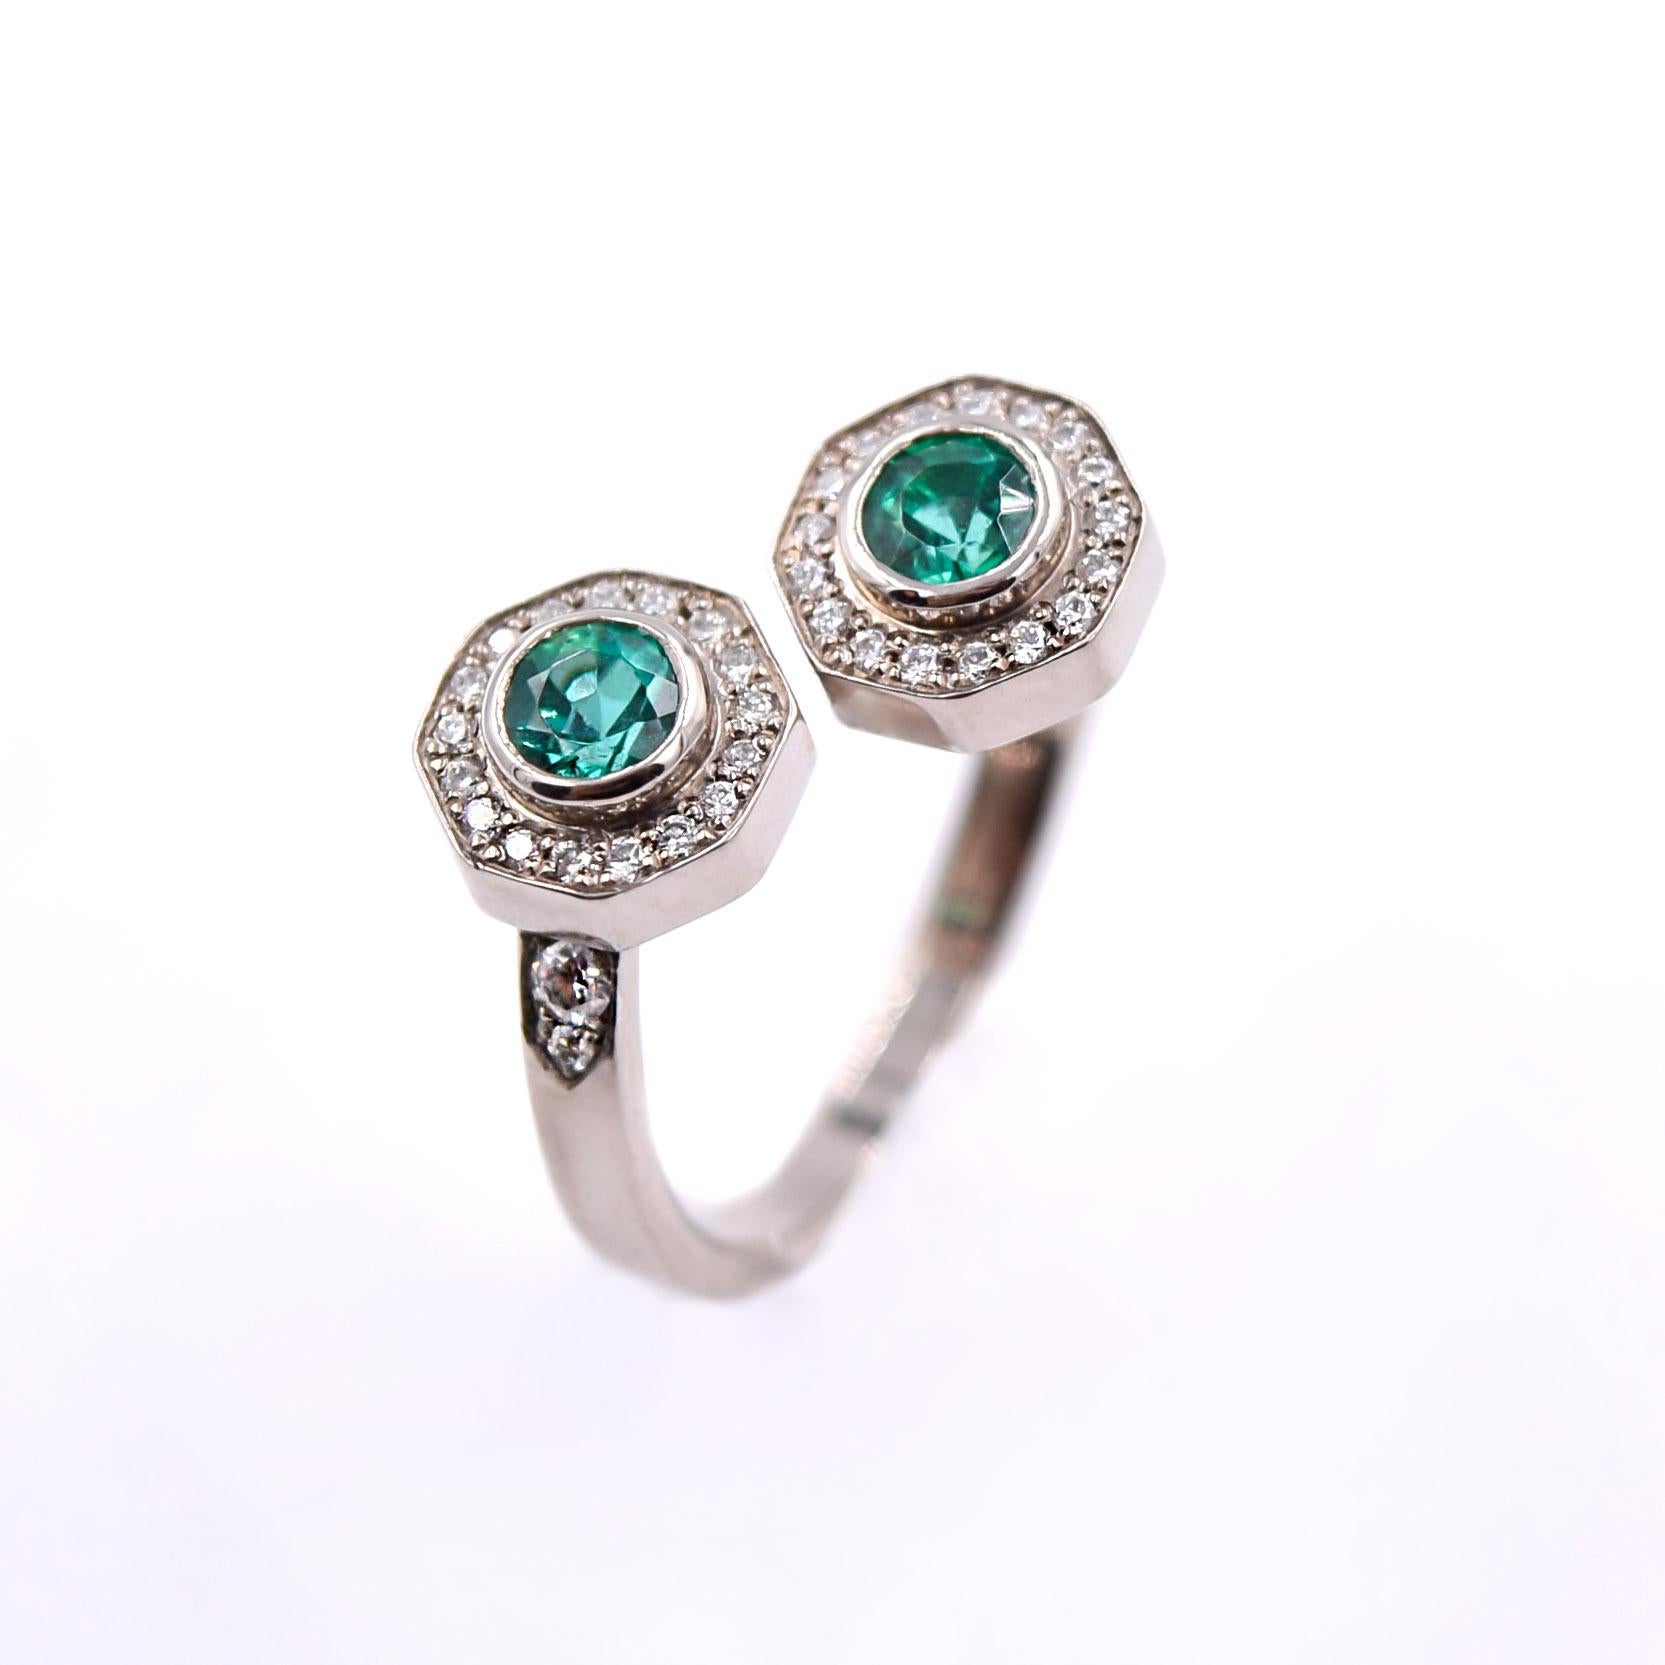 Beautiful bypass diamond ring with two emerald center stones, designed and handcrafted by Lucas Priolo. 

This ring features two round emeralds totaling 0.46 carats, which are carefully set in a bezel setting.
0.38 carats of white diamonds surround